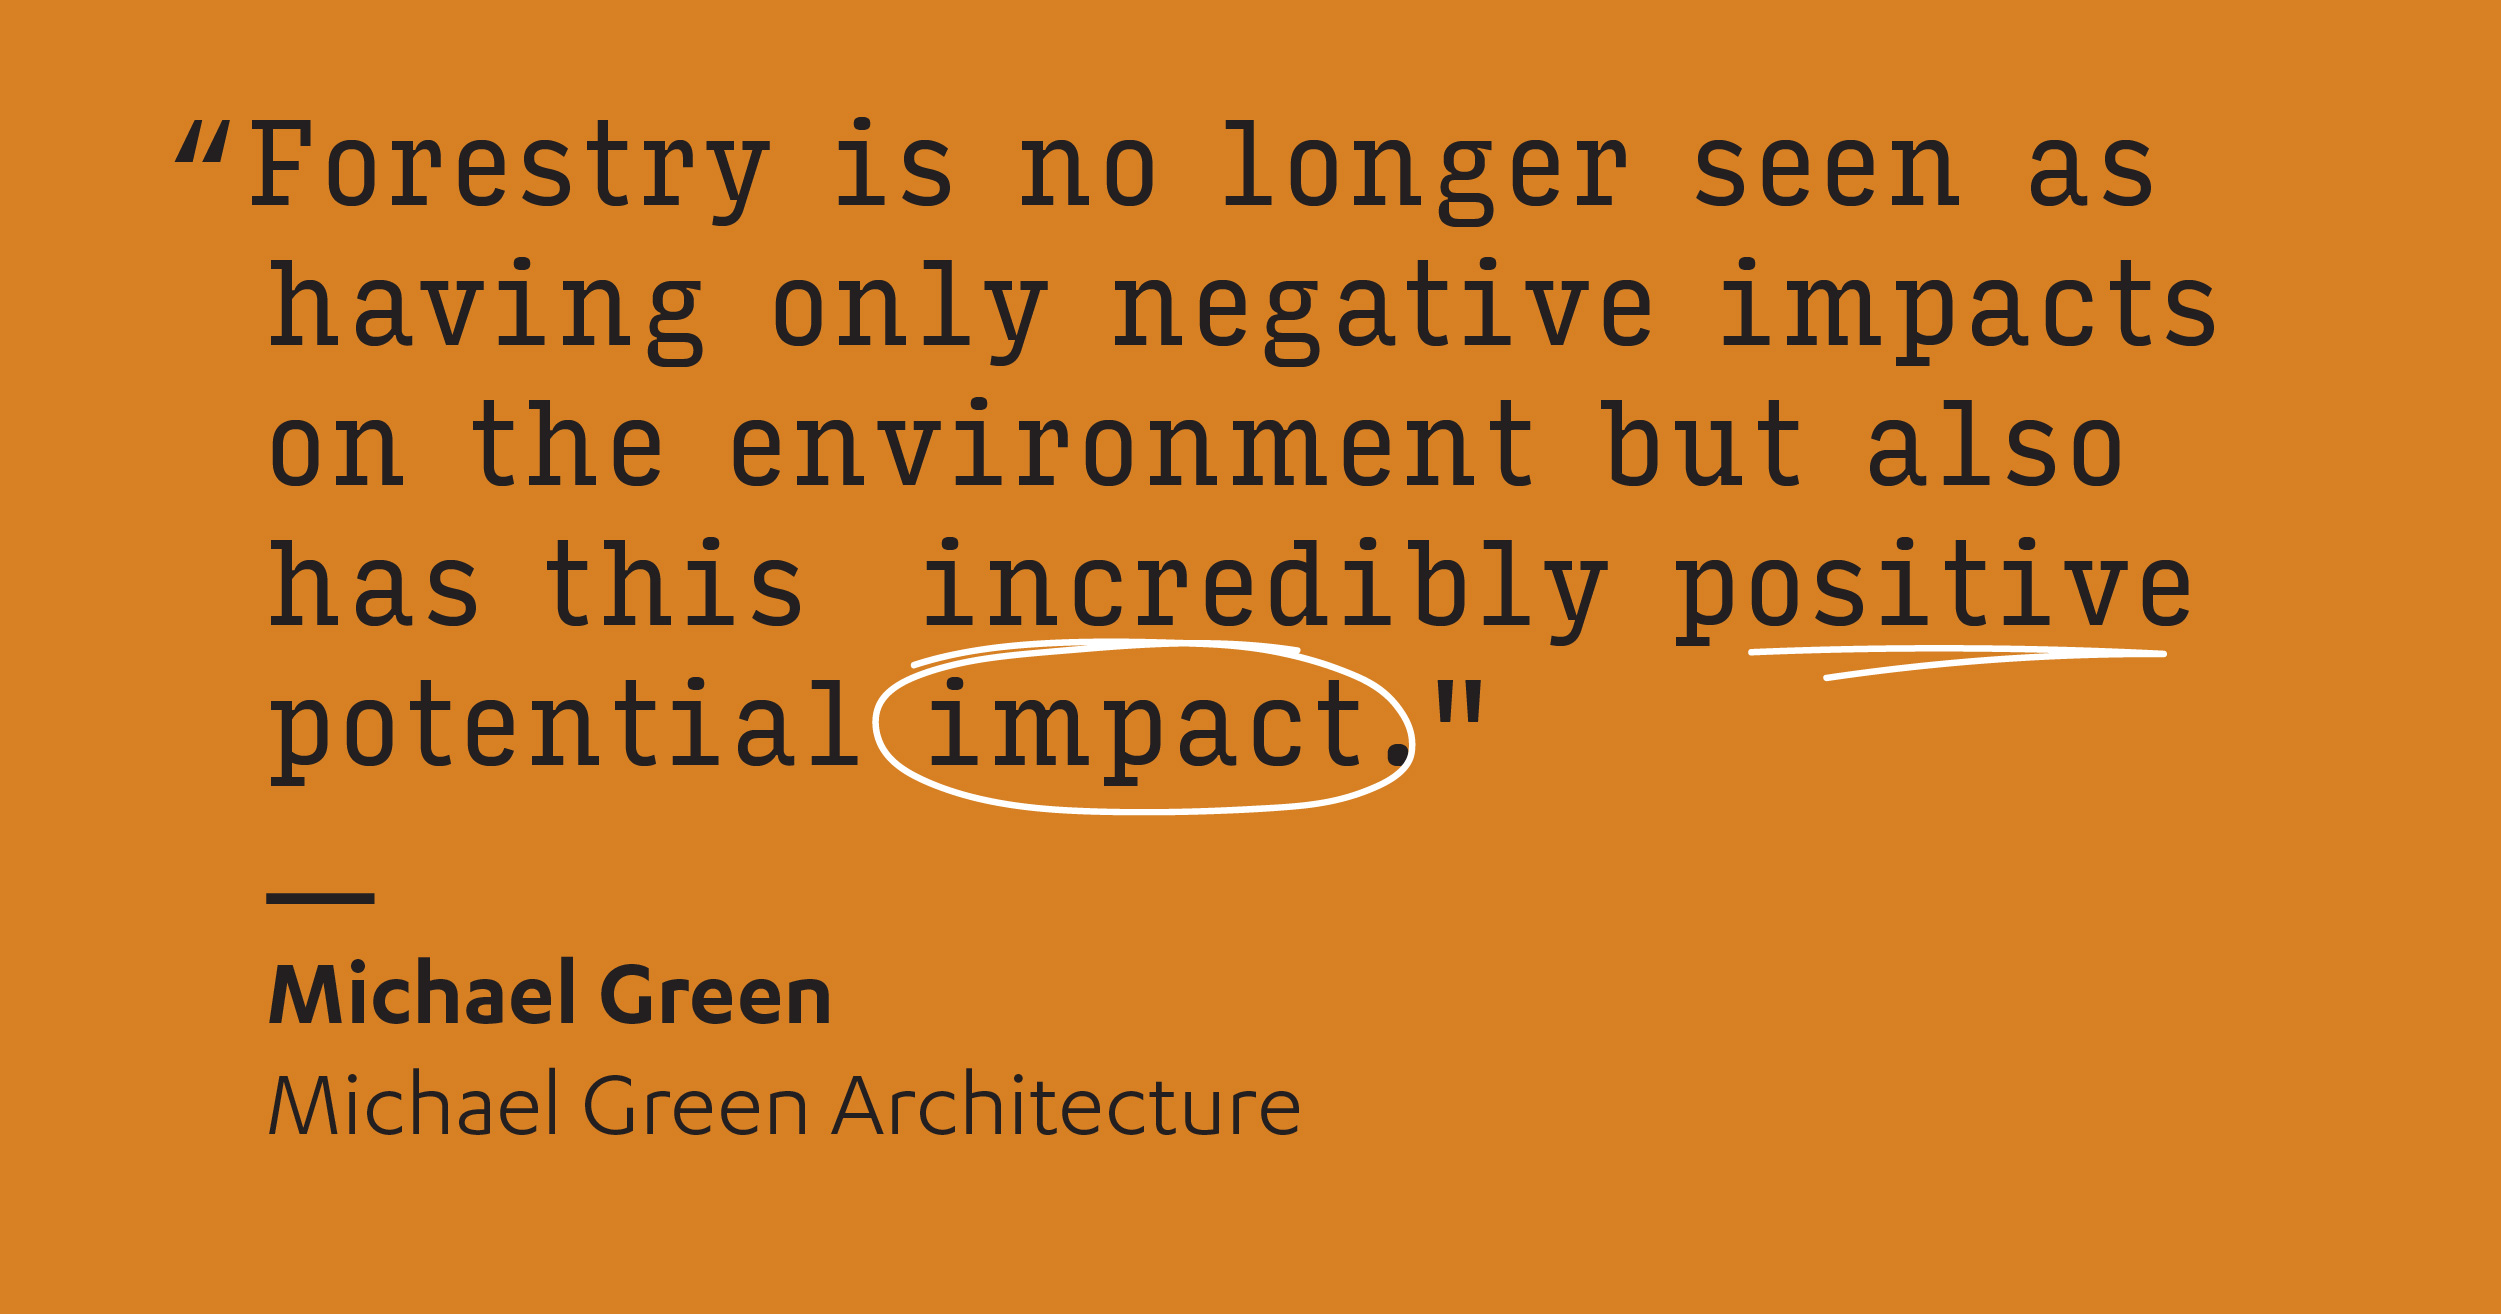 Quote | Michael Green “Forestry positive potential impact”